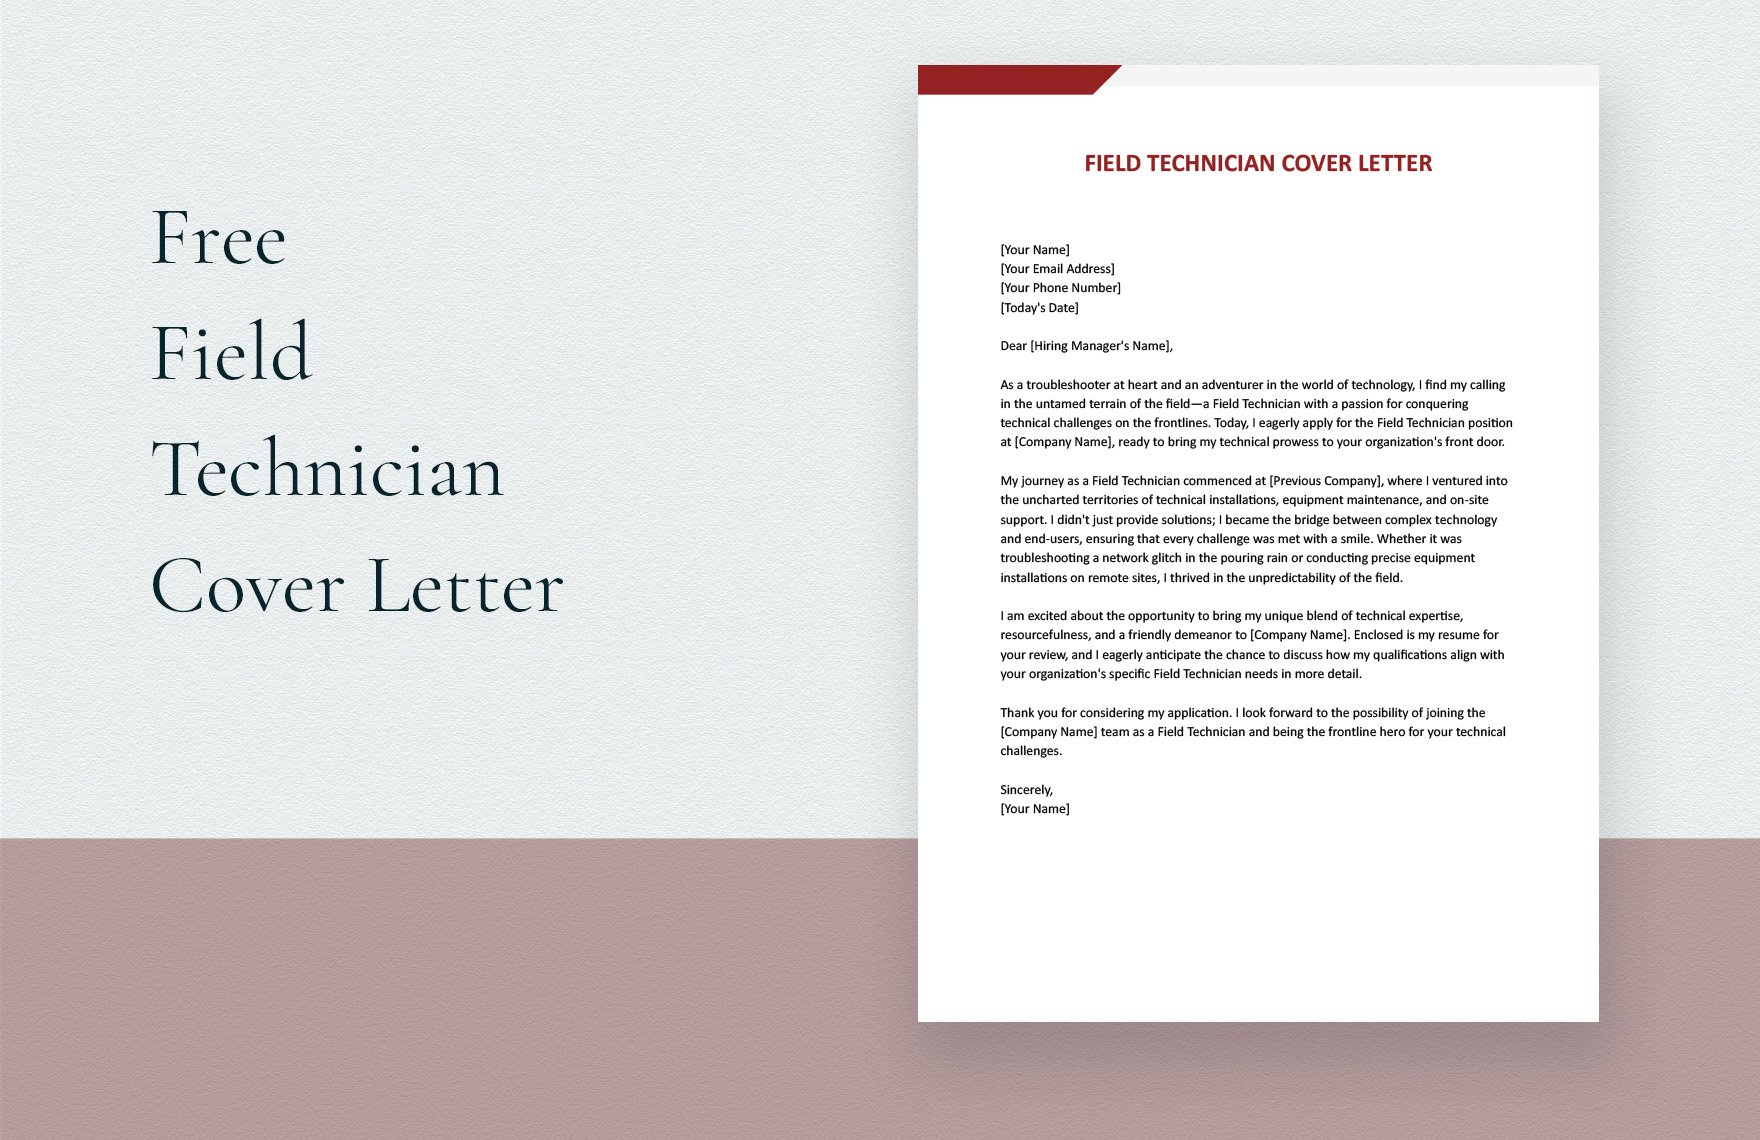 Field Technician Cover Letter in Word, Google Docs - Download ...